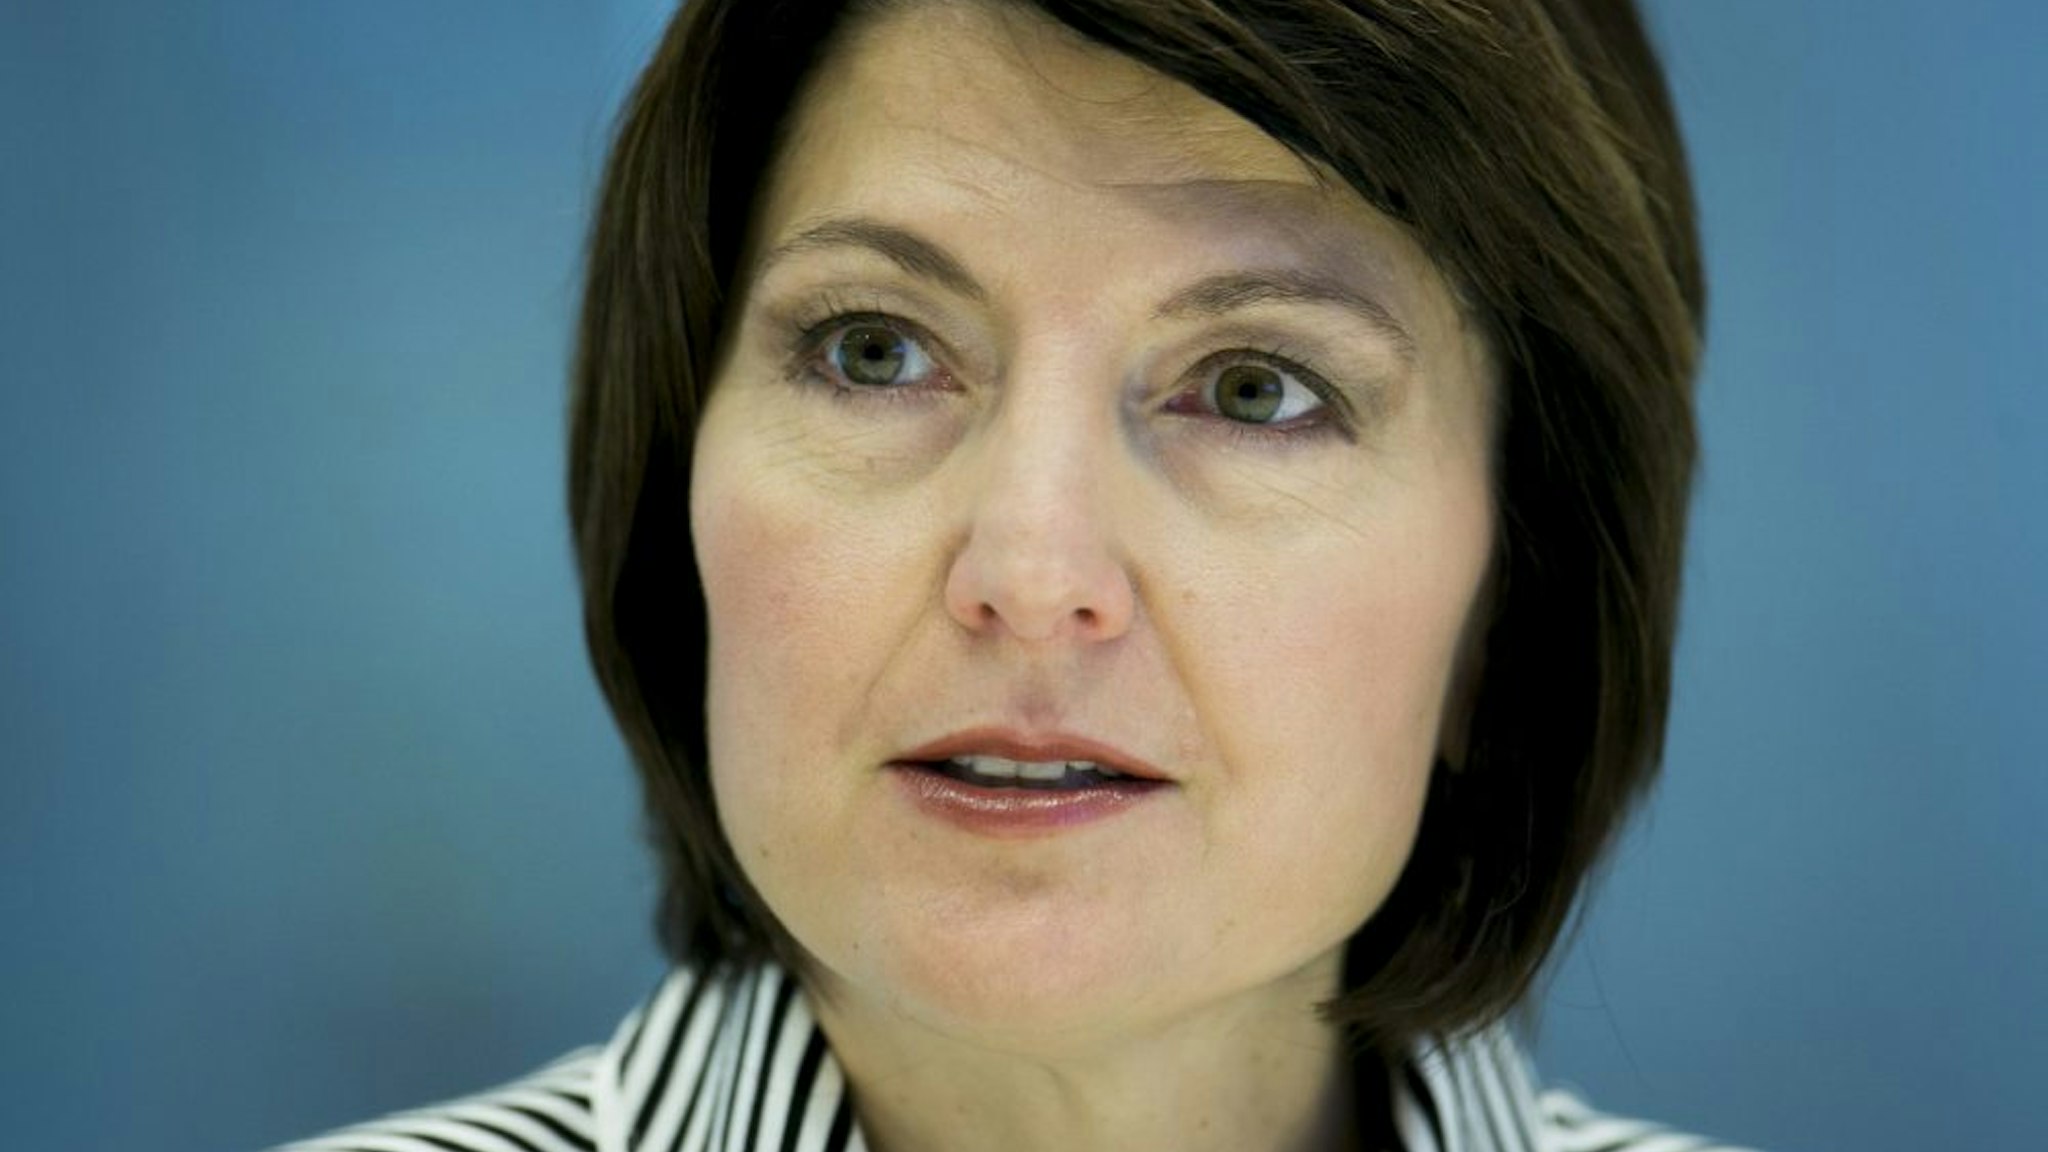 Representative Cathy McMorris Rodgers, a Republican from Washington, speaks during an interview in New York, U.S., on Friday, March 28, 2014. President Obama "doesn't have the flexibility" in health-care law to change deadlines, McMorris Rodgers said.